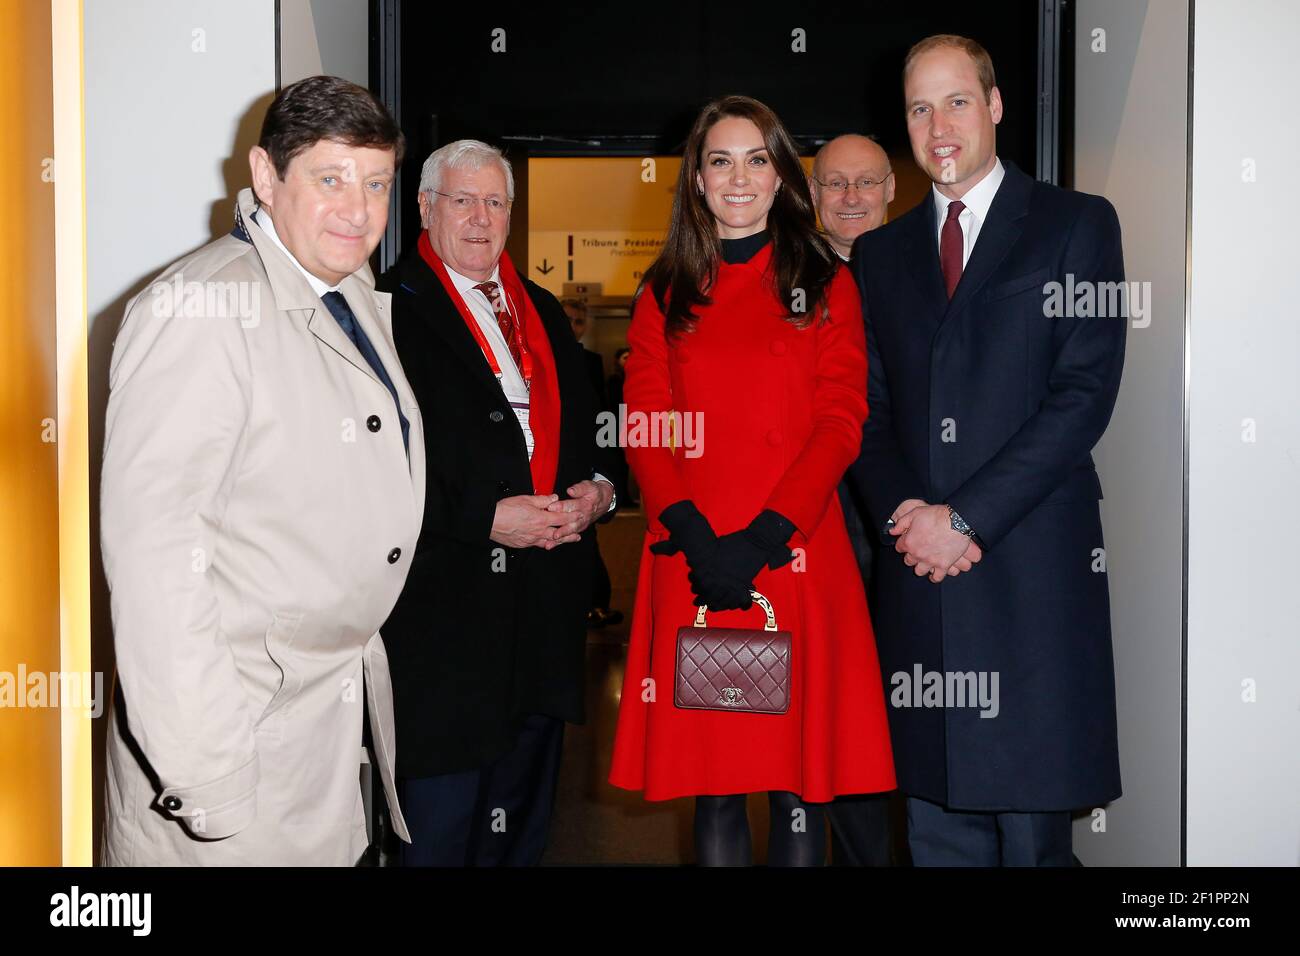 Catherine Elizabeth Middleton known as Kate Middleton, Duchess of Cambridge in United of Kingdom (Catherine Elizabeth Middleton dit Kate Middleton, Duchesse de Cambridge au Royaume-Uni), William Arthur Philip Louis known as Prince William, Duke of Cambridge in United of Kingdom (William Arthur Philip Louis dit Prince William, Duc de Cambridge au Royaume-Uni), Bernard Laporte (President of the french rugby federation), Dennis Gethin, President of the Welsh Rugby Union, Patrick Kanner, French Minister of Urbain Affairs, Youth and Sport arriving to the floor gate of the presidential stand during Stock Photo